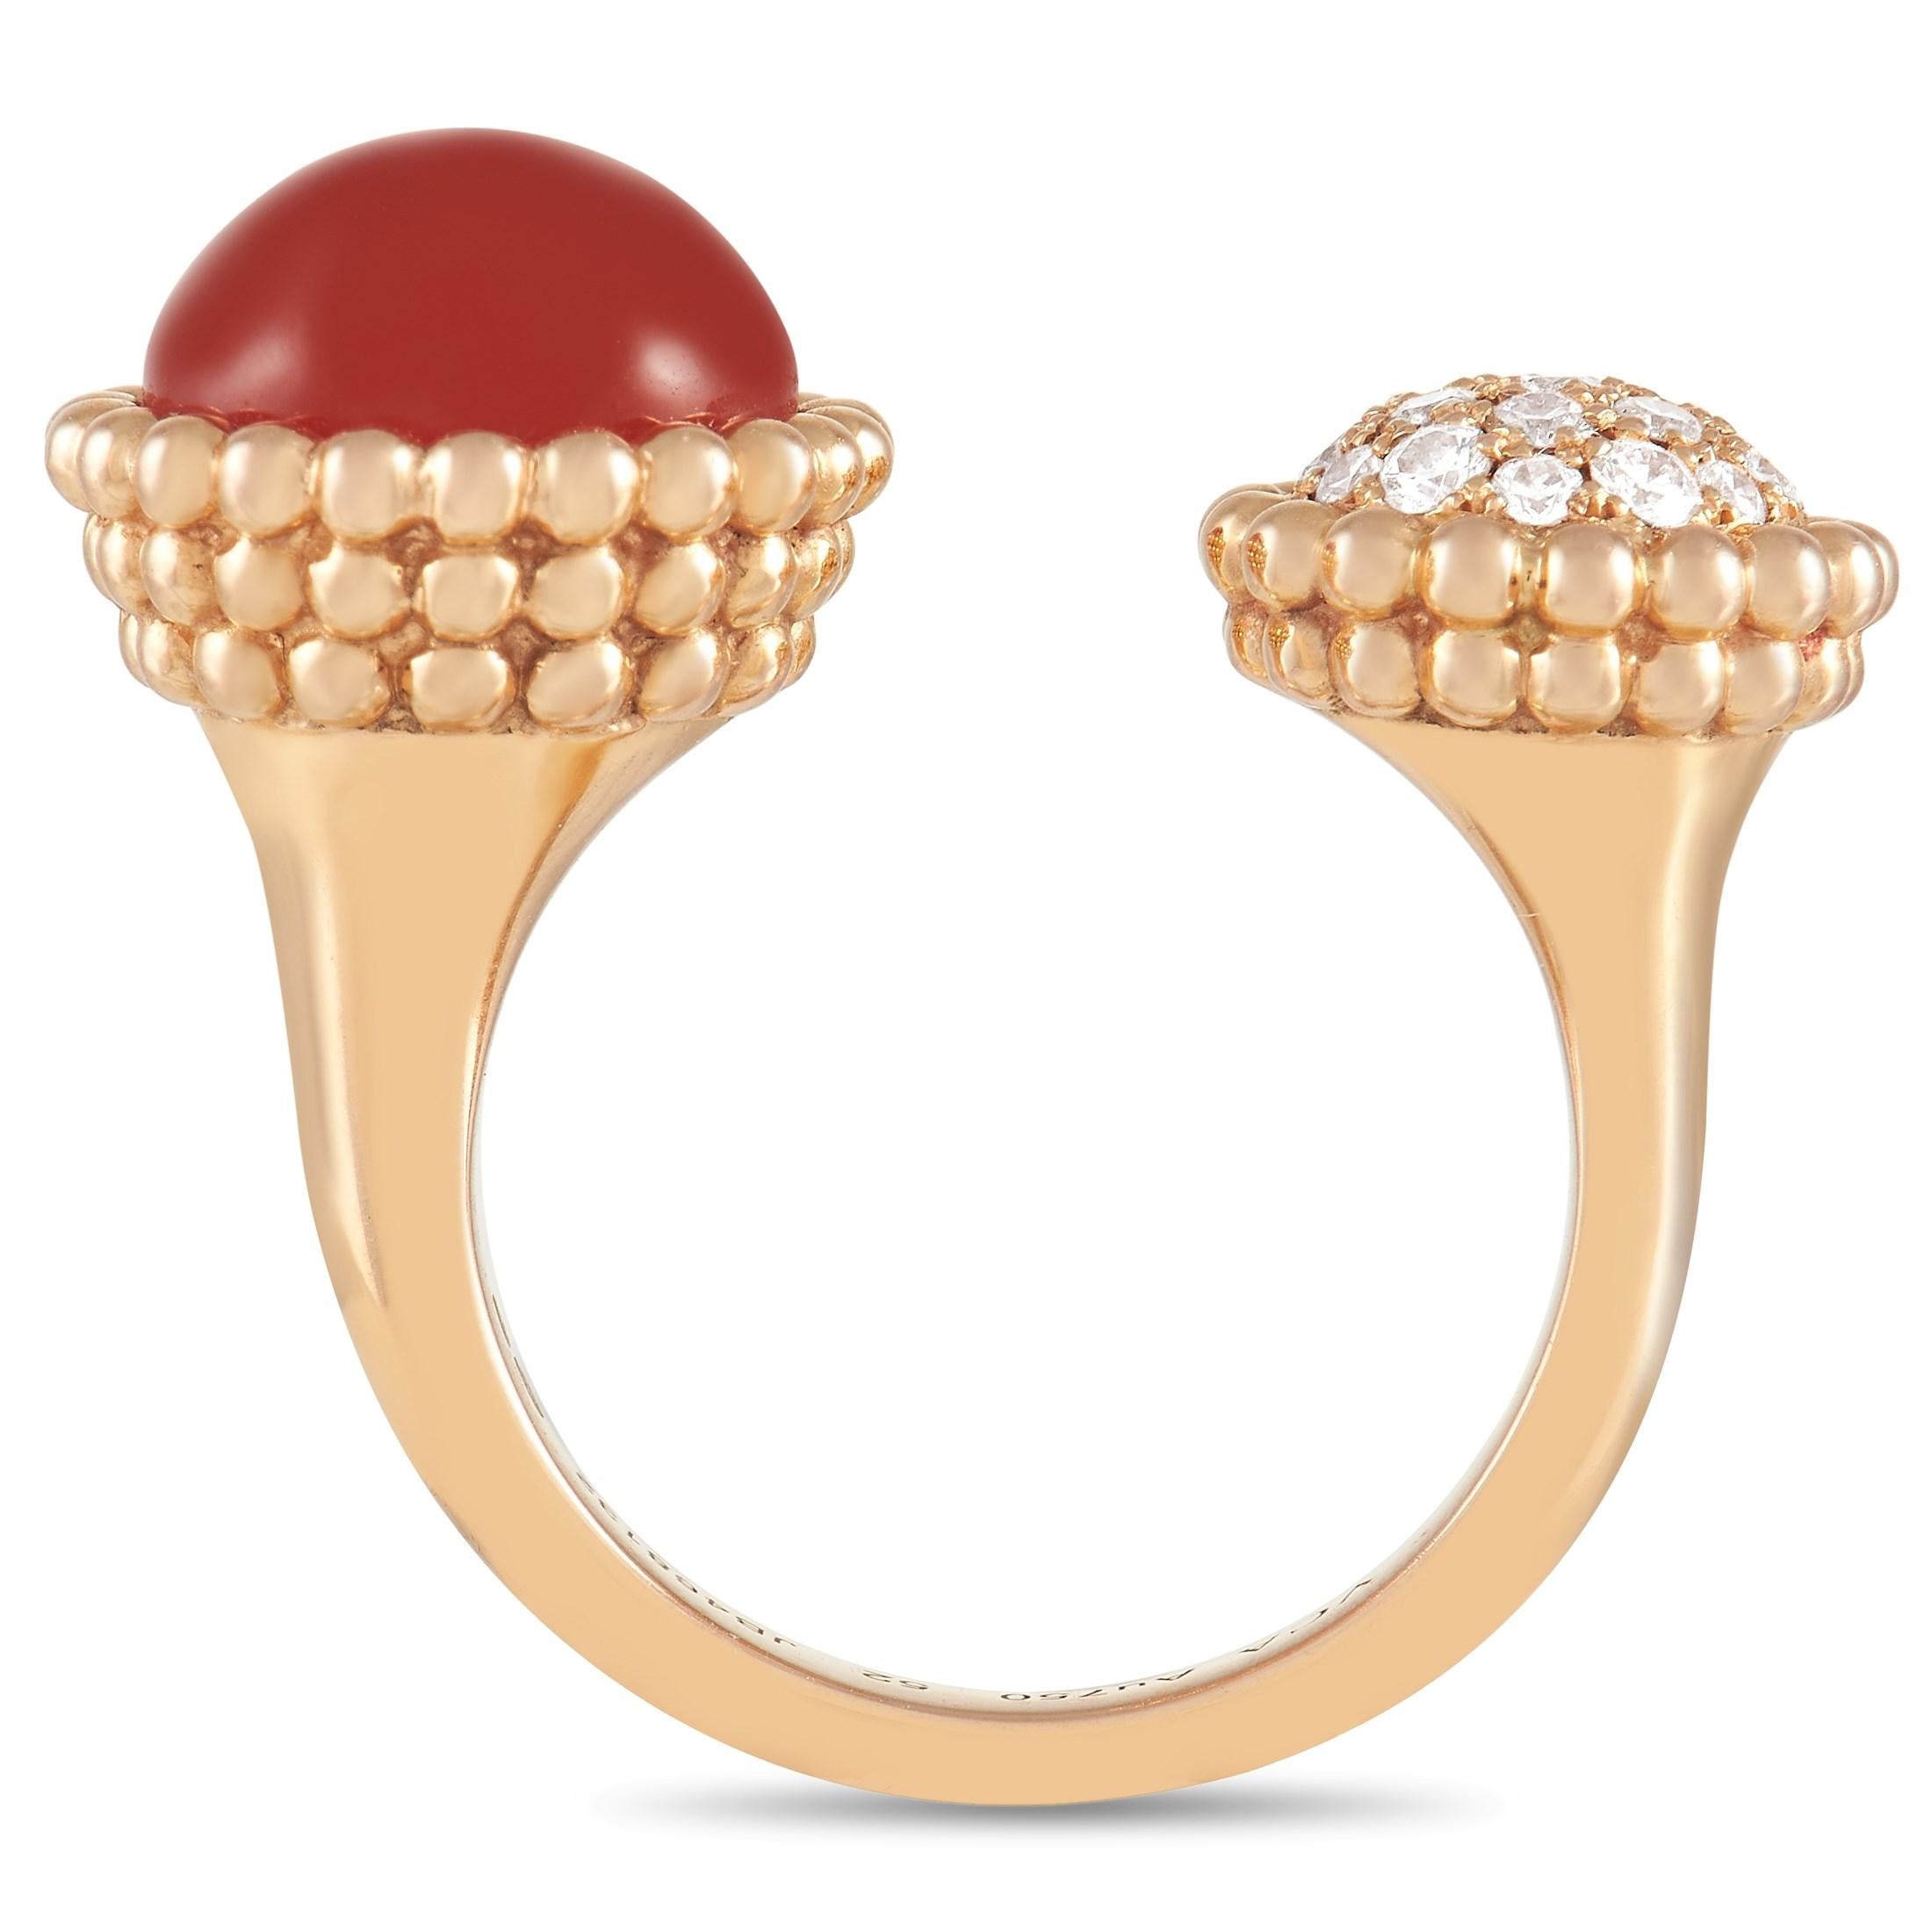 This Van Cleef & Arpels Perlee ring features a between-the-finger design – making it ideal for anyone who appreciates jewelry that is equal parts luxurious and unique. At one end of this dynamic piece, you’ll find a coral colored Carnelian cabochon.